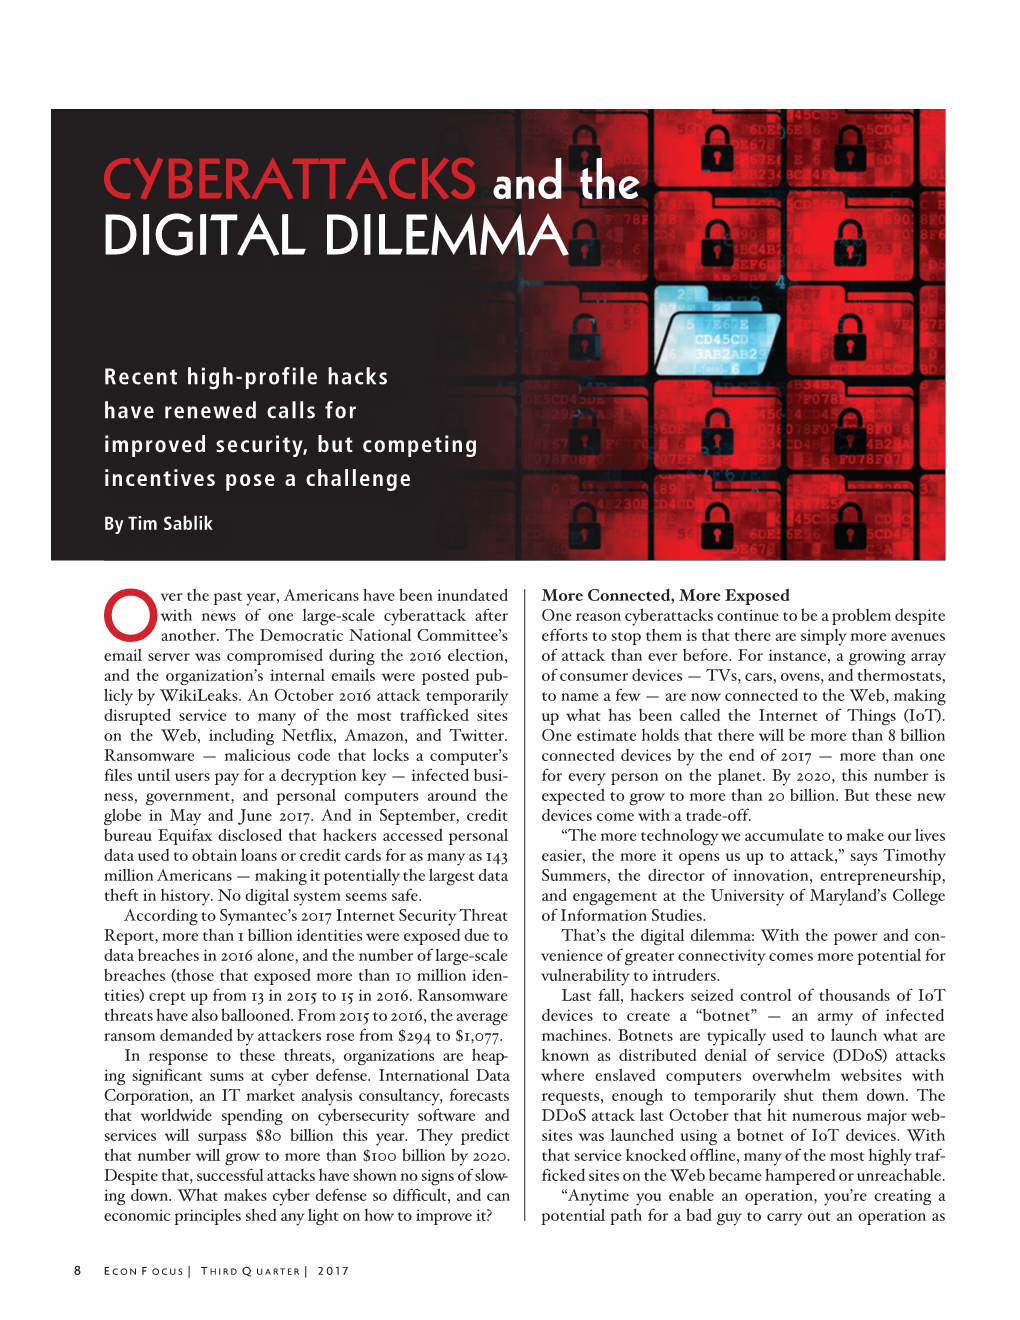 CYBERATTACKS and the DIGITAL DILEMMA